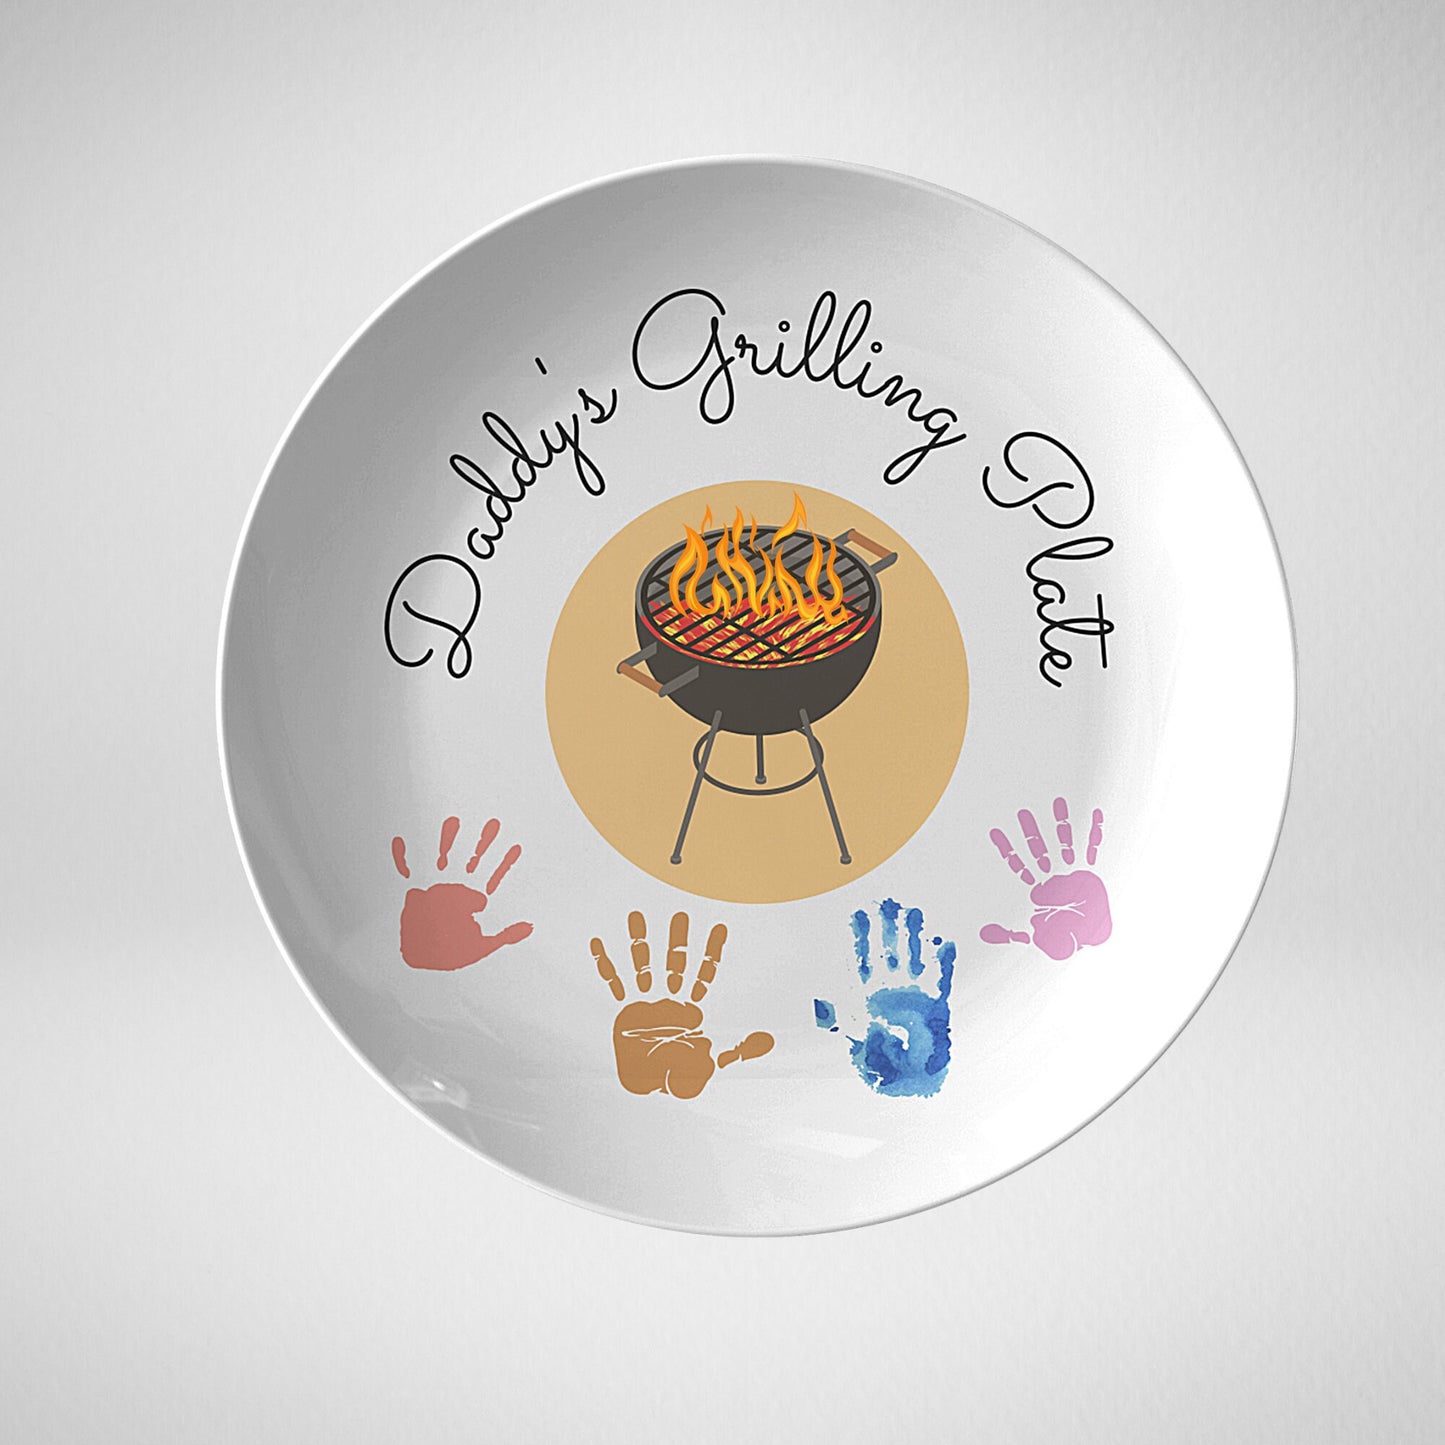 Grilling Plate for Dad with Kids Handprints